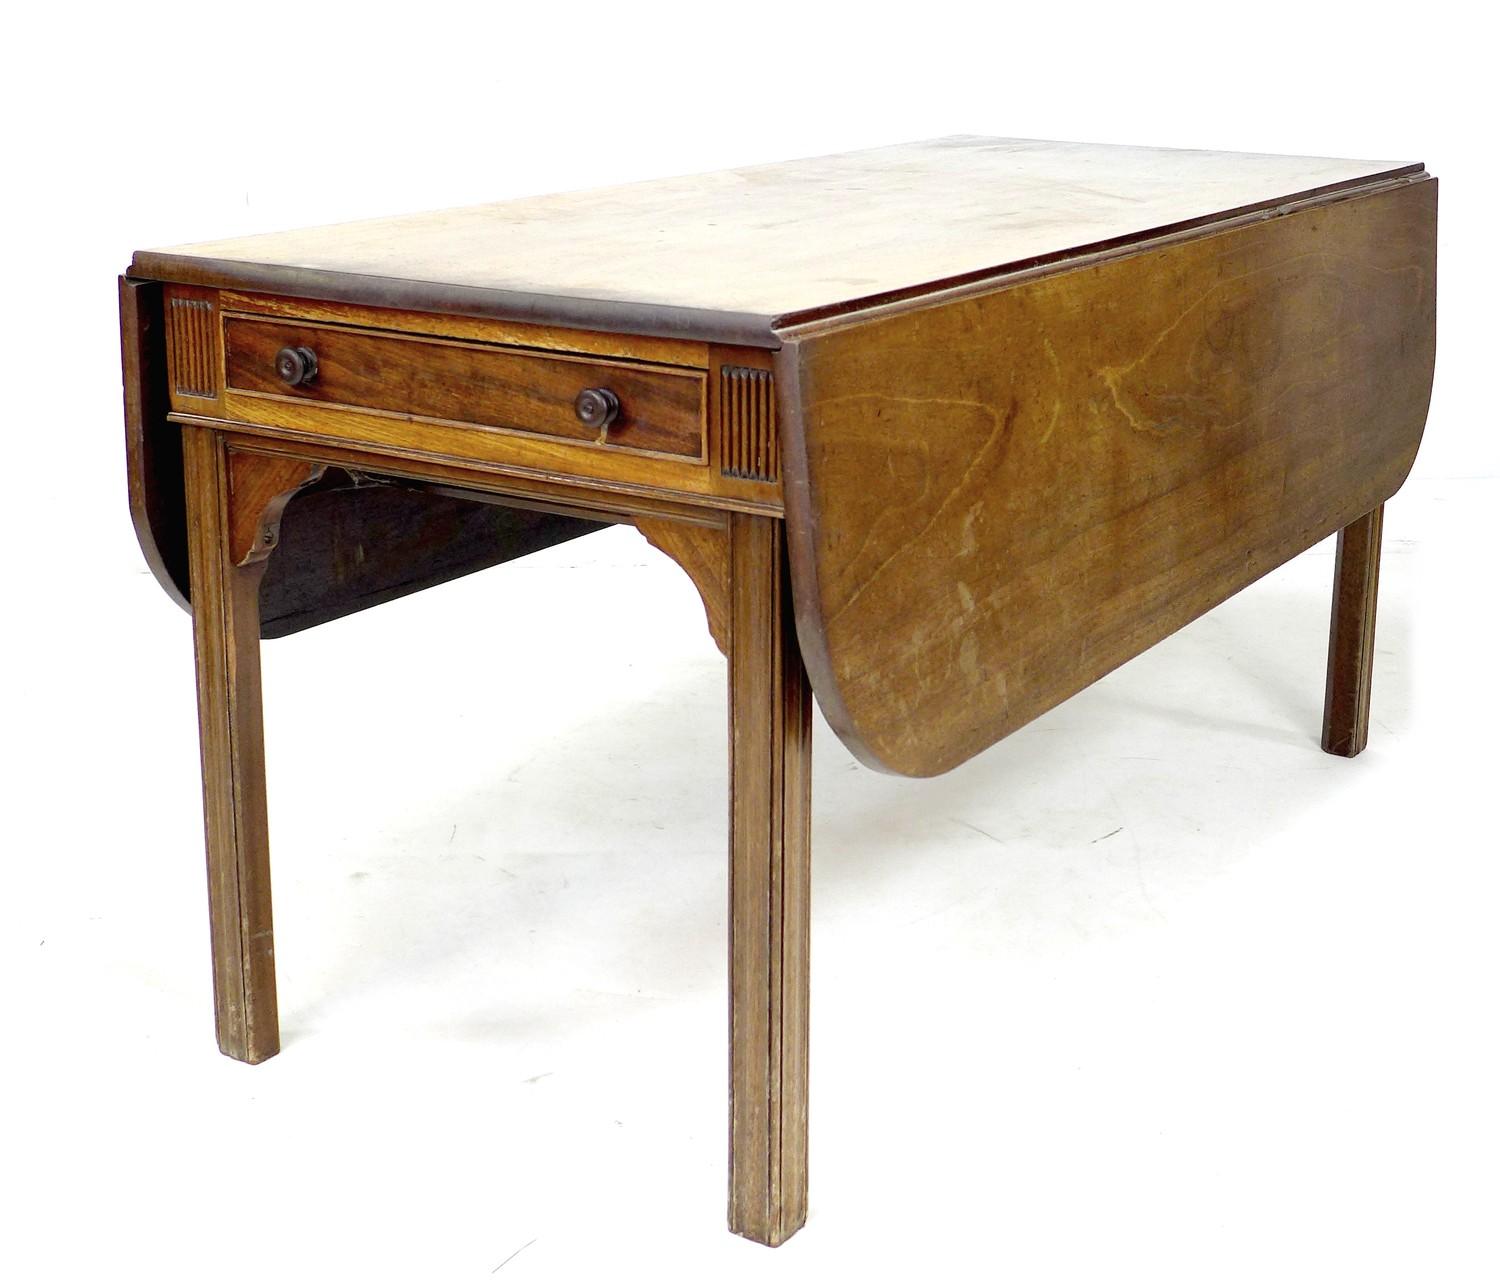 A George III mahogany drop leaf table, of long narrow form with single drawer, raised on